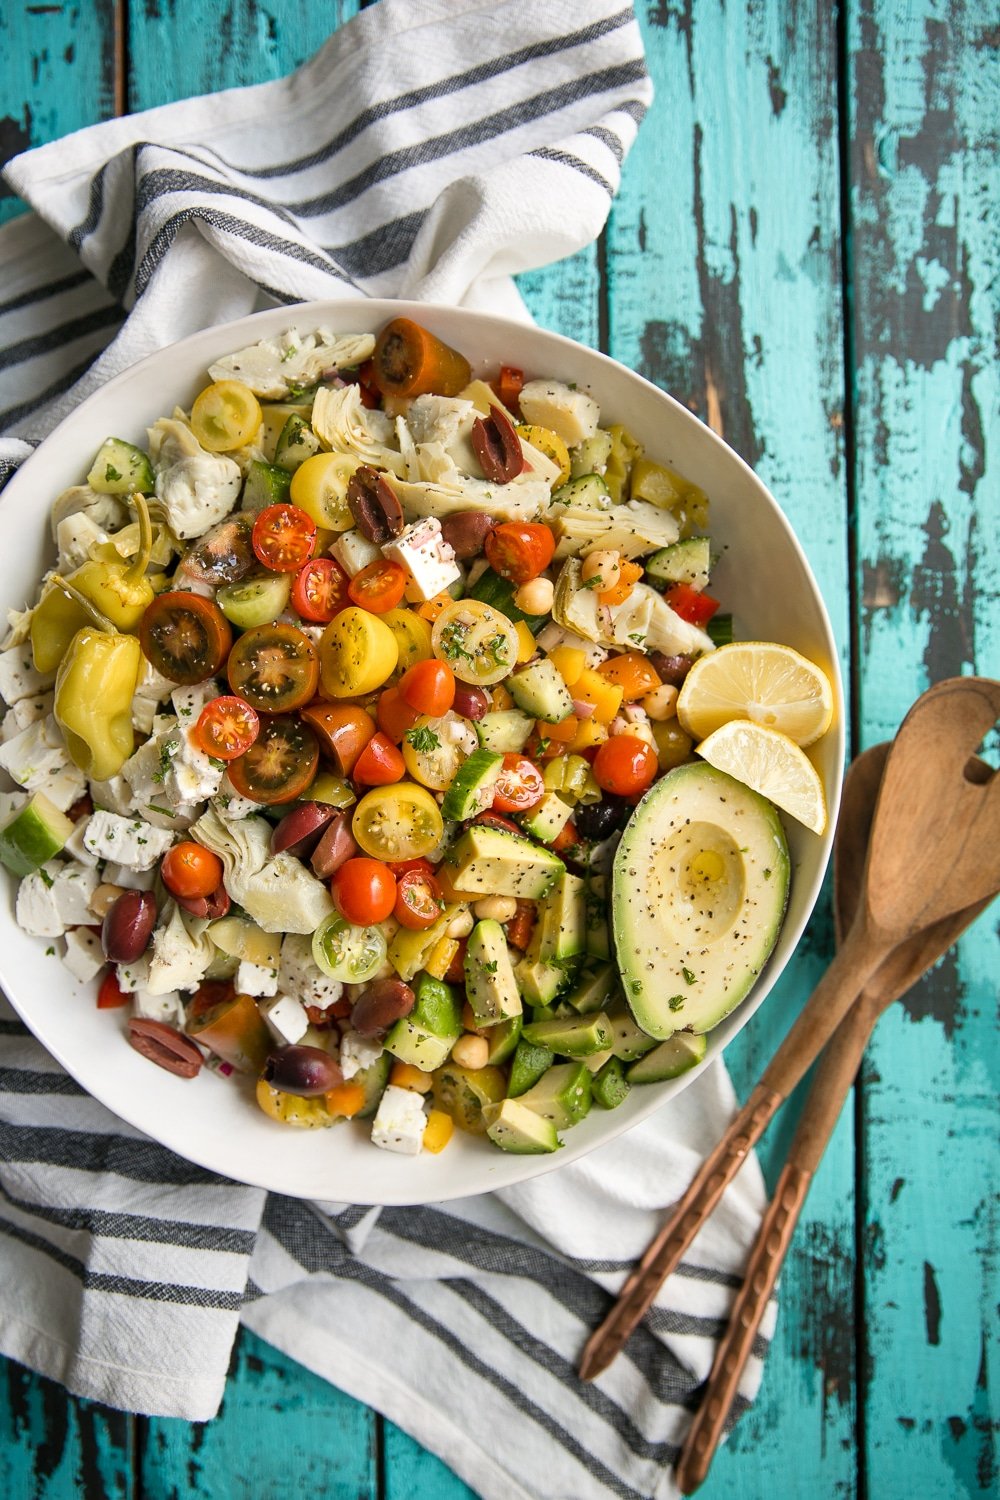 Easy Vegetarian Chopped Mediterranean Salad with chickpeas, avocado, tomatoes, bell pepper, olives, and artichoke hearts.